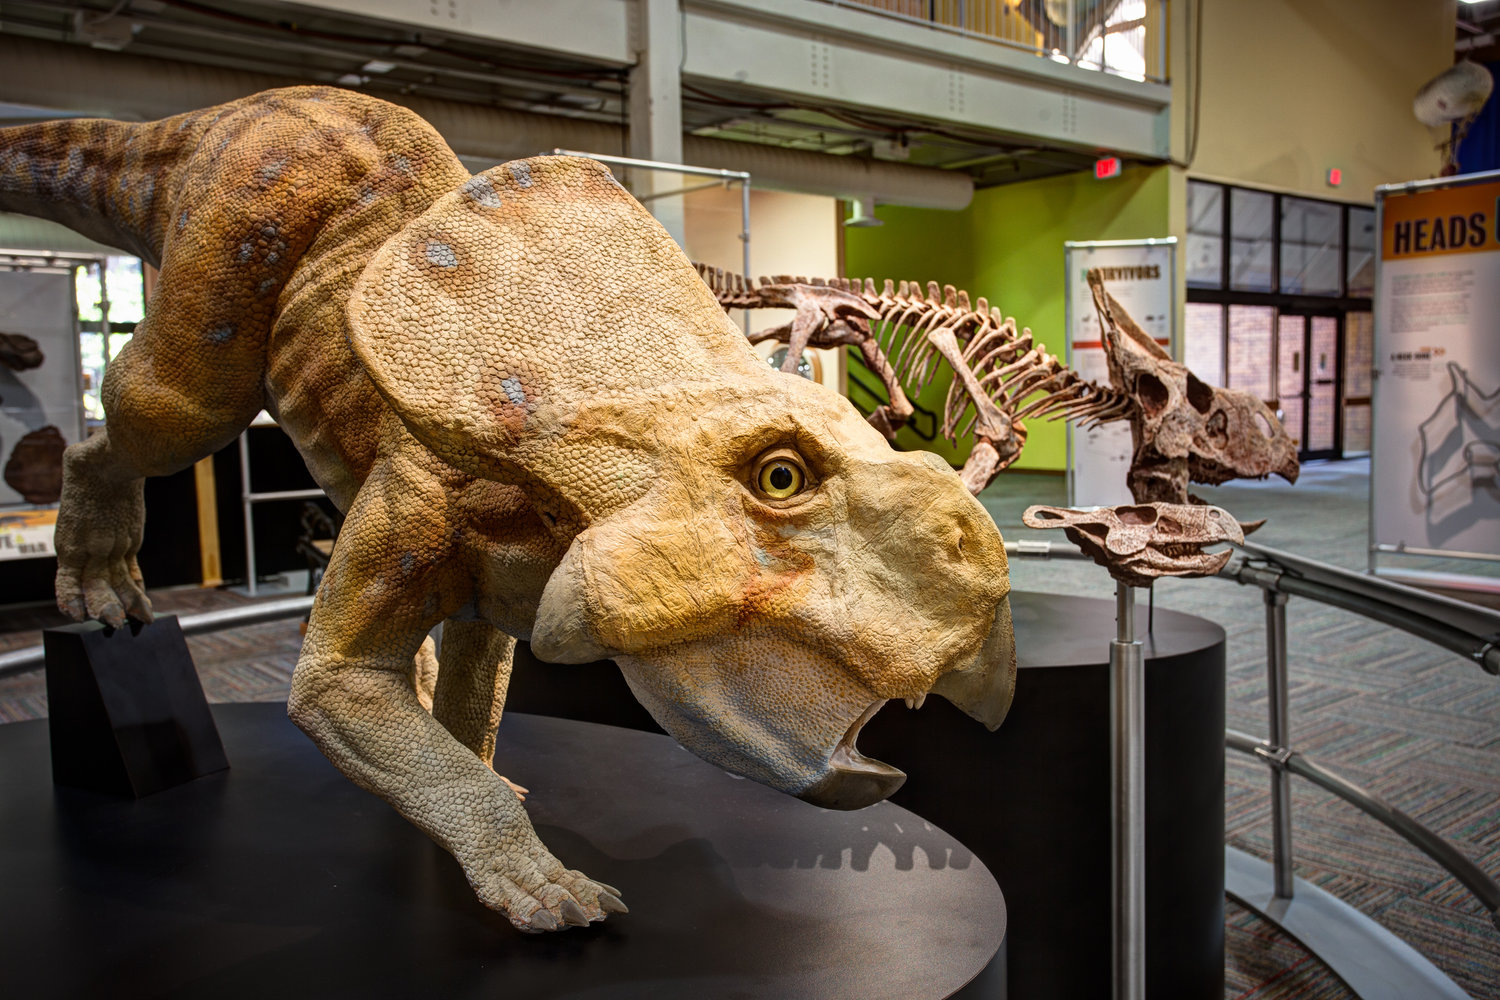 This colorful fellow is among the dinosaur exhibits being featured at the Las Cruces Museum of Art, beginning Jan. 25.